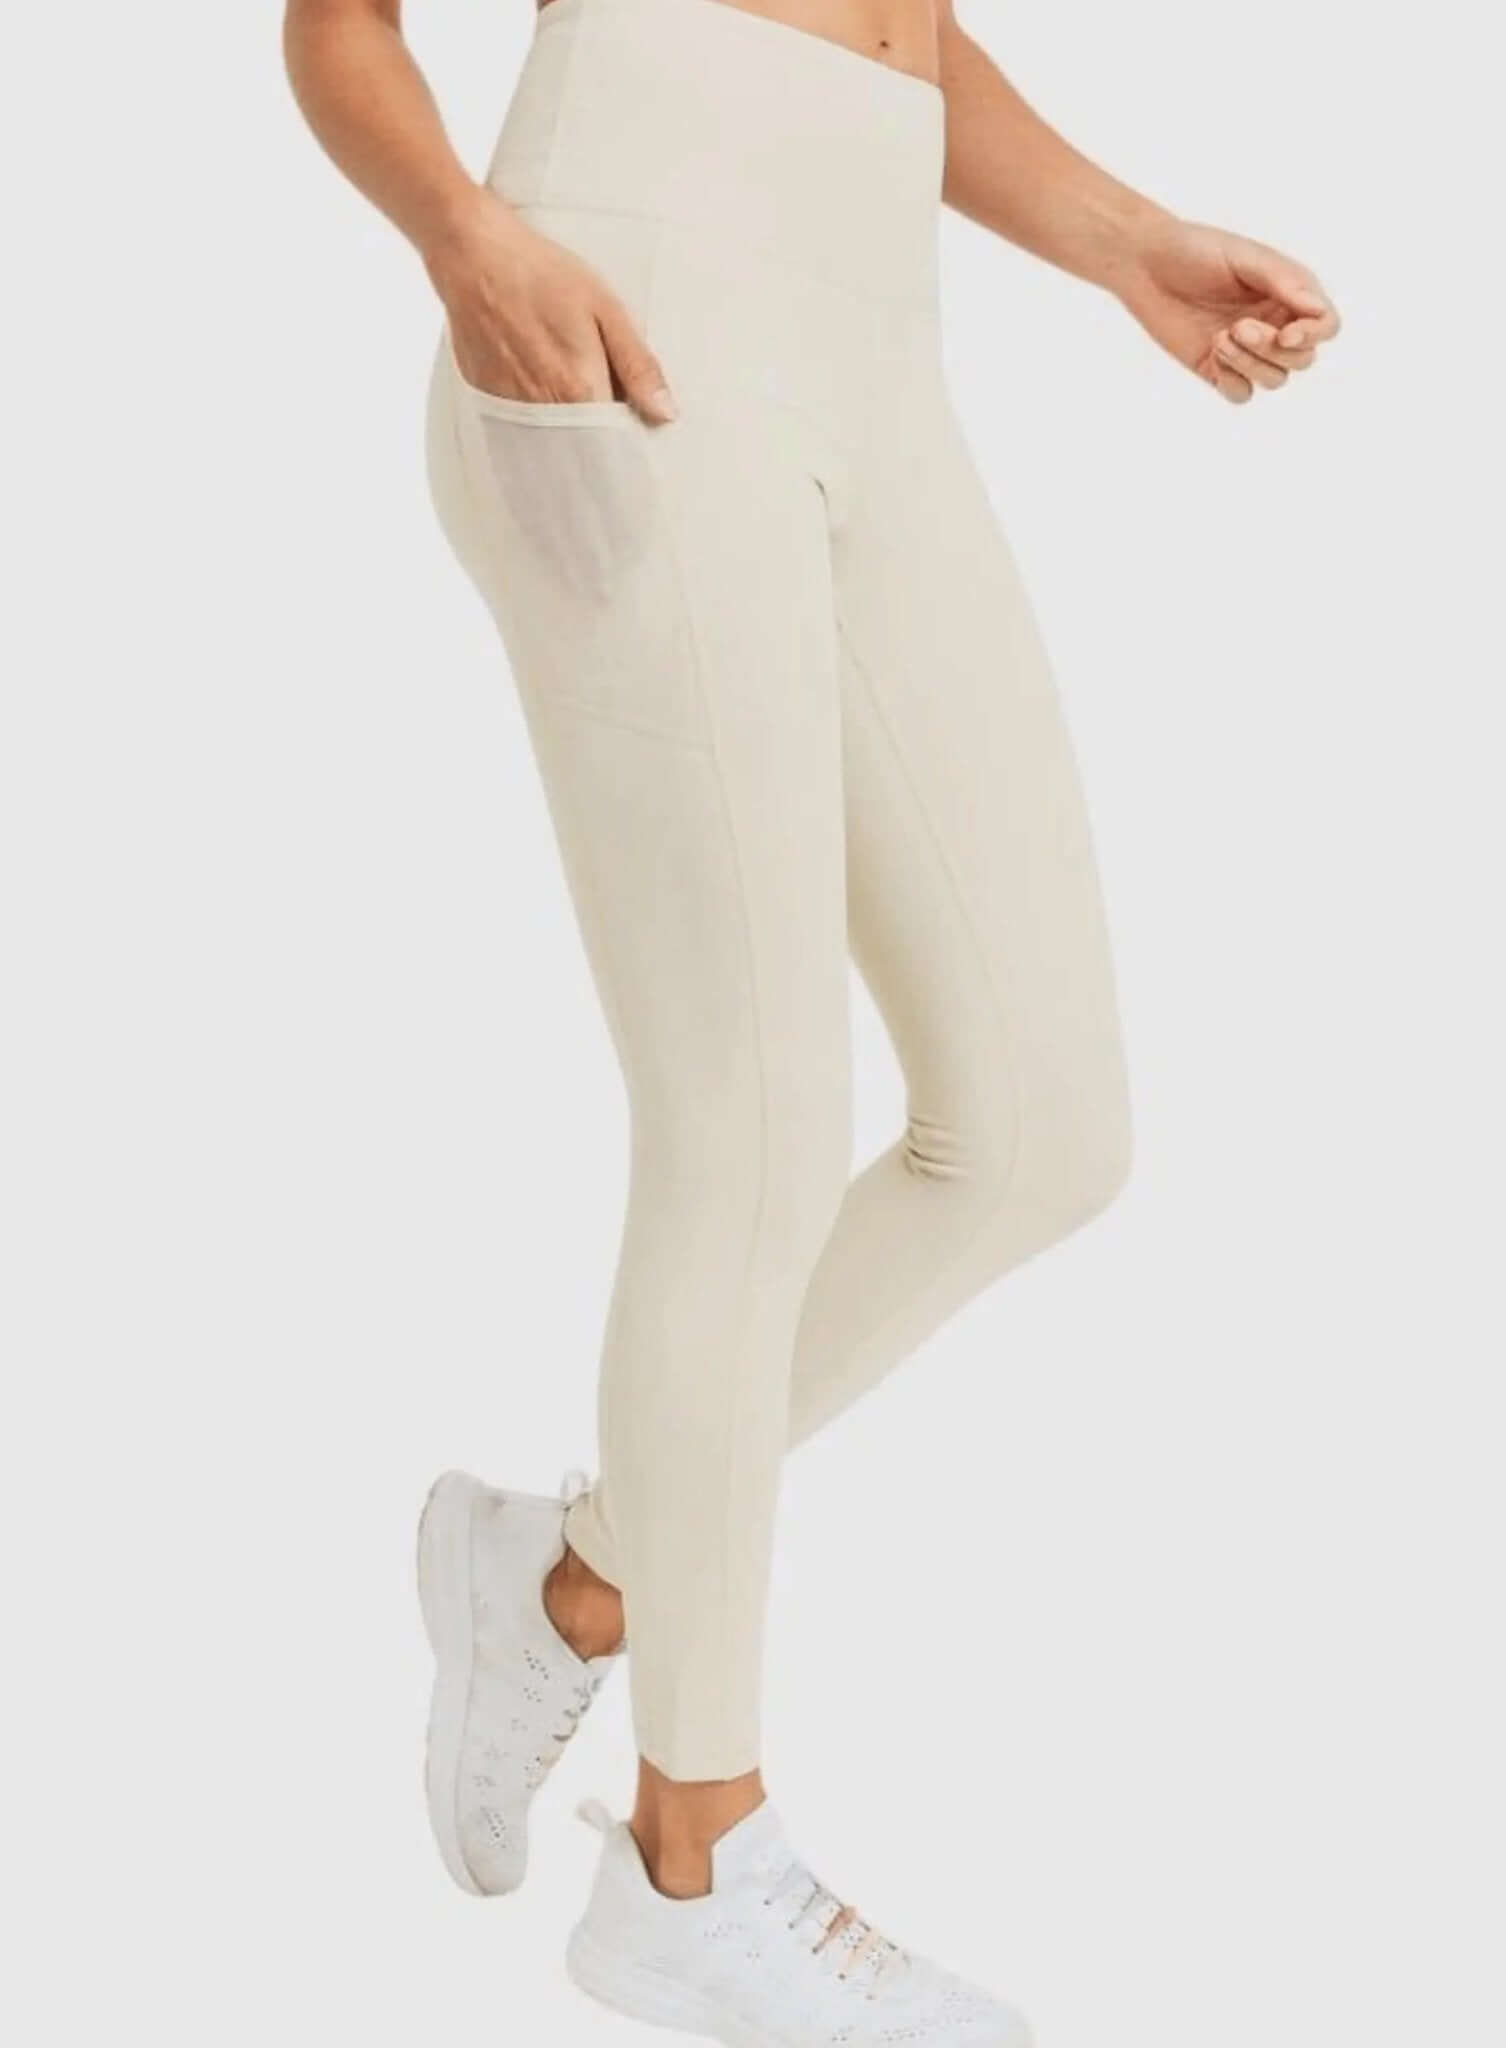 Performance High Waisted Leggings with Mesh Pockets - Rocca & Co